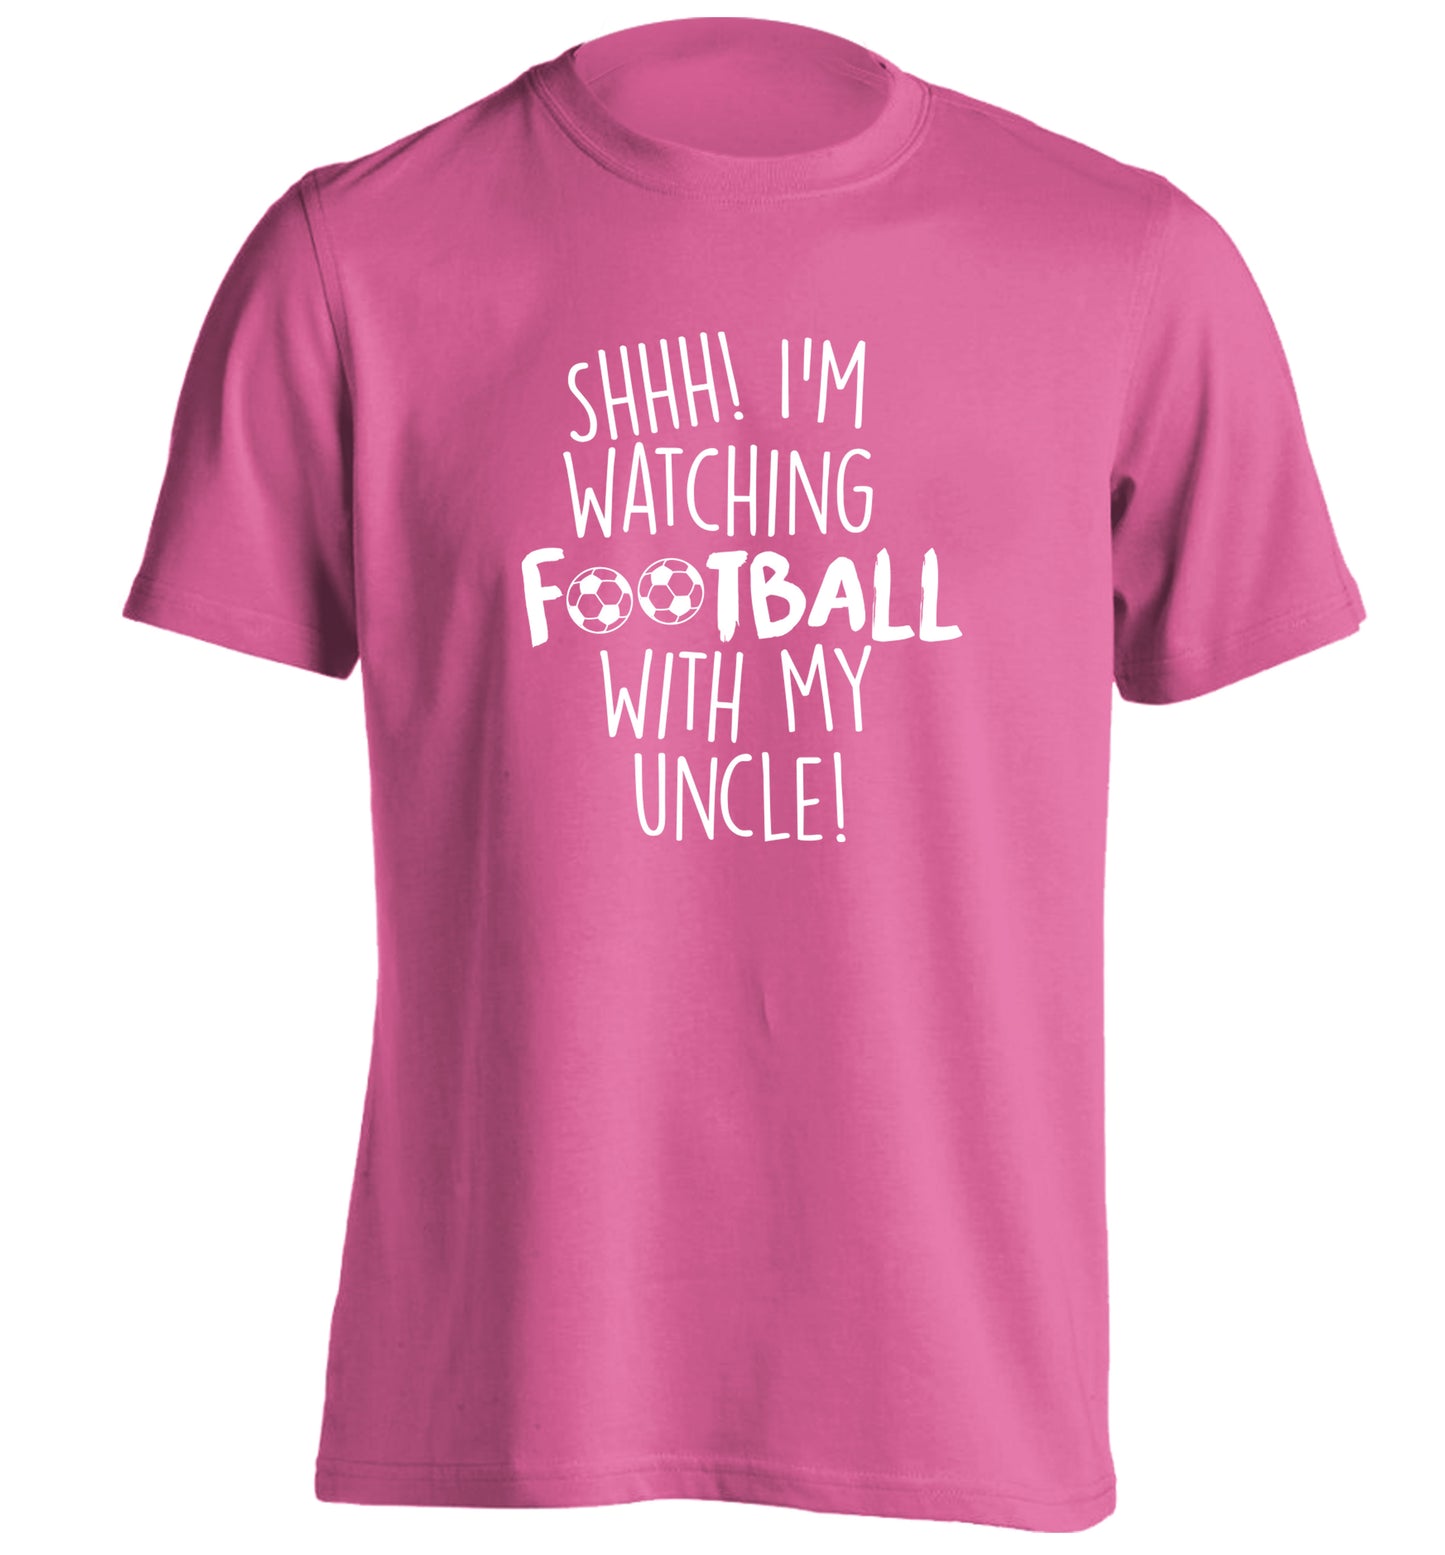 Shhh I'm watching football with my uncle adults unisexpink Tshirt 2XL